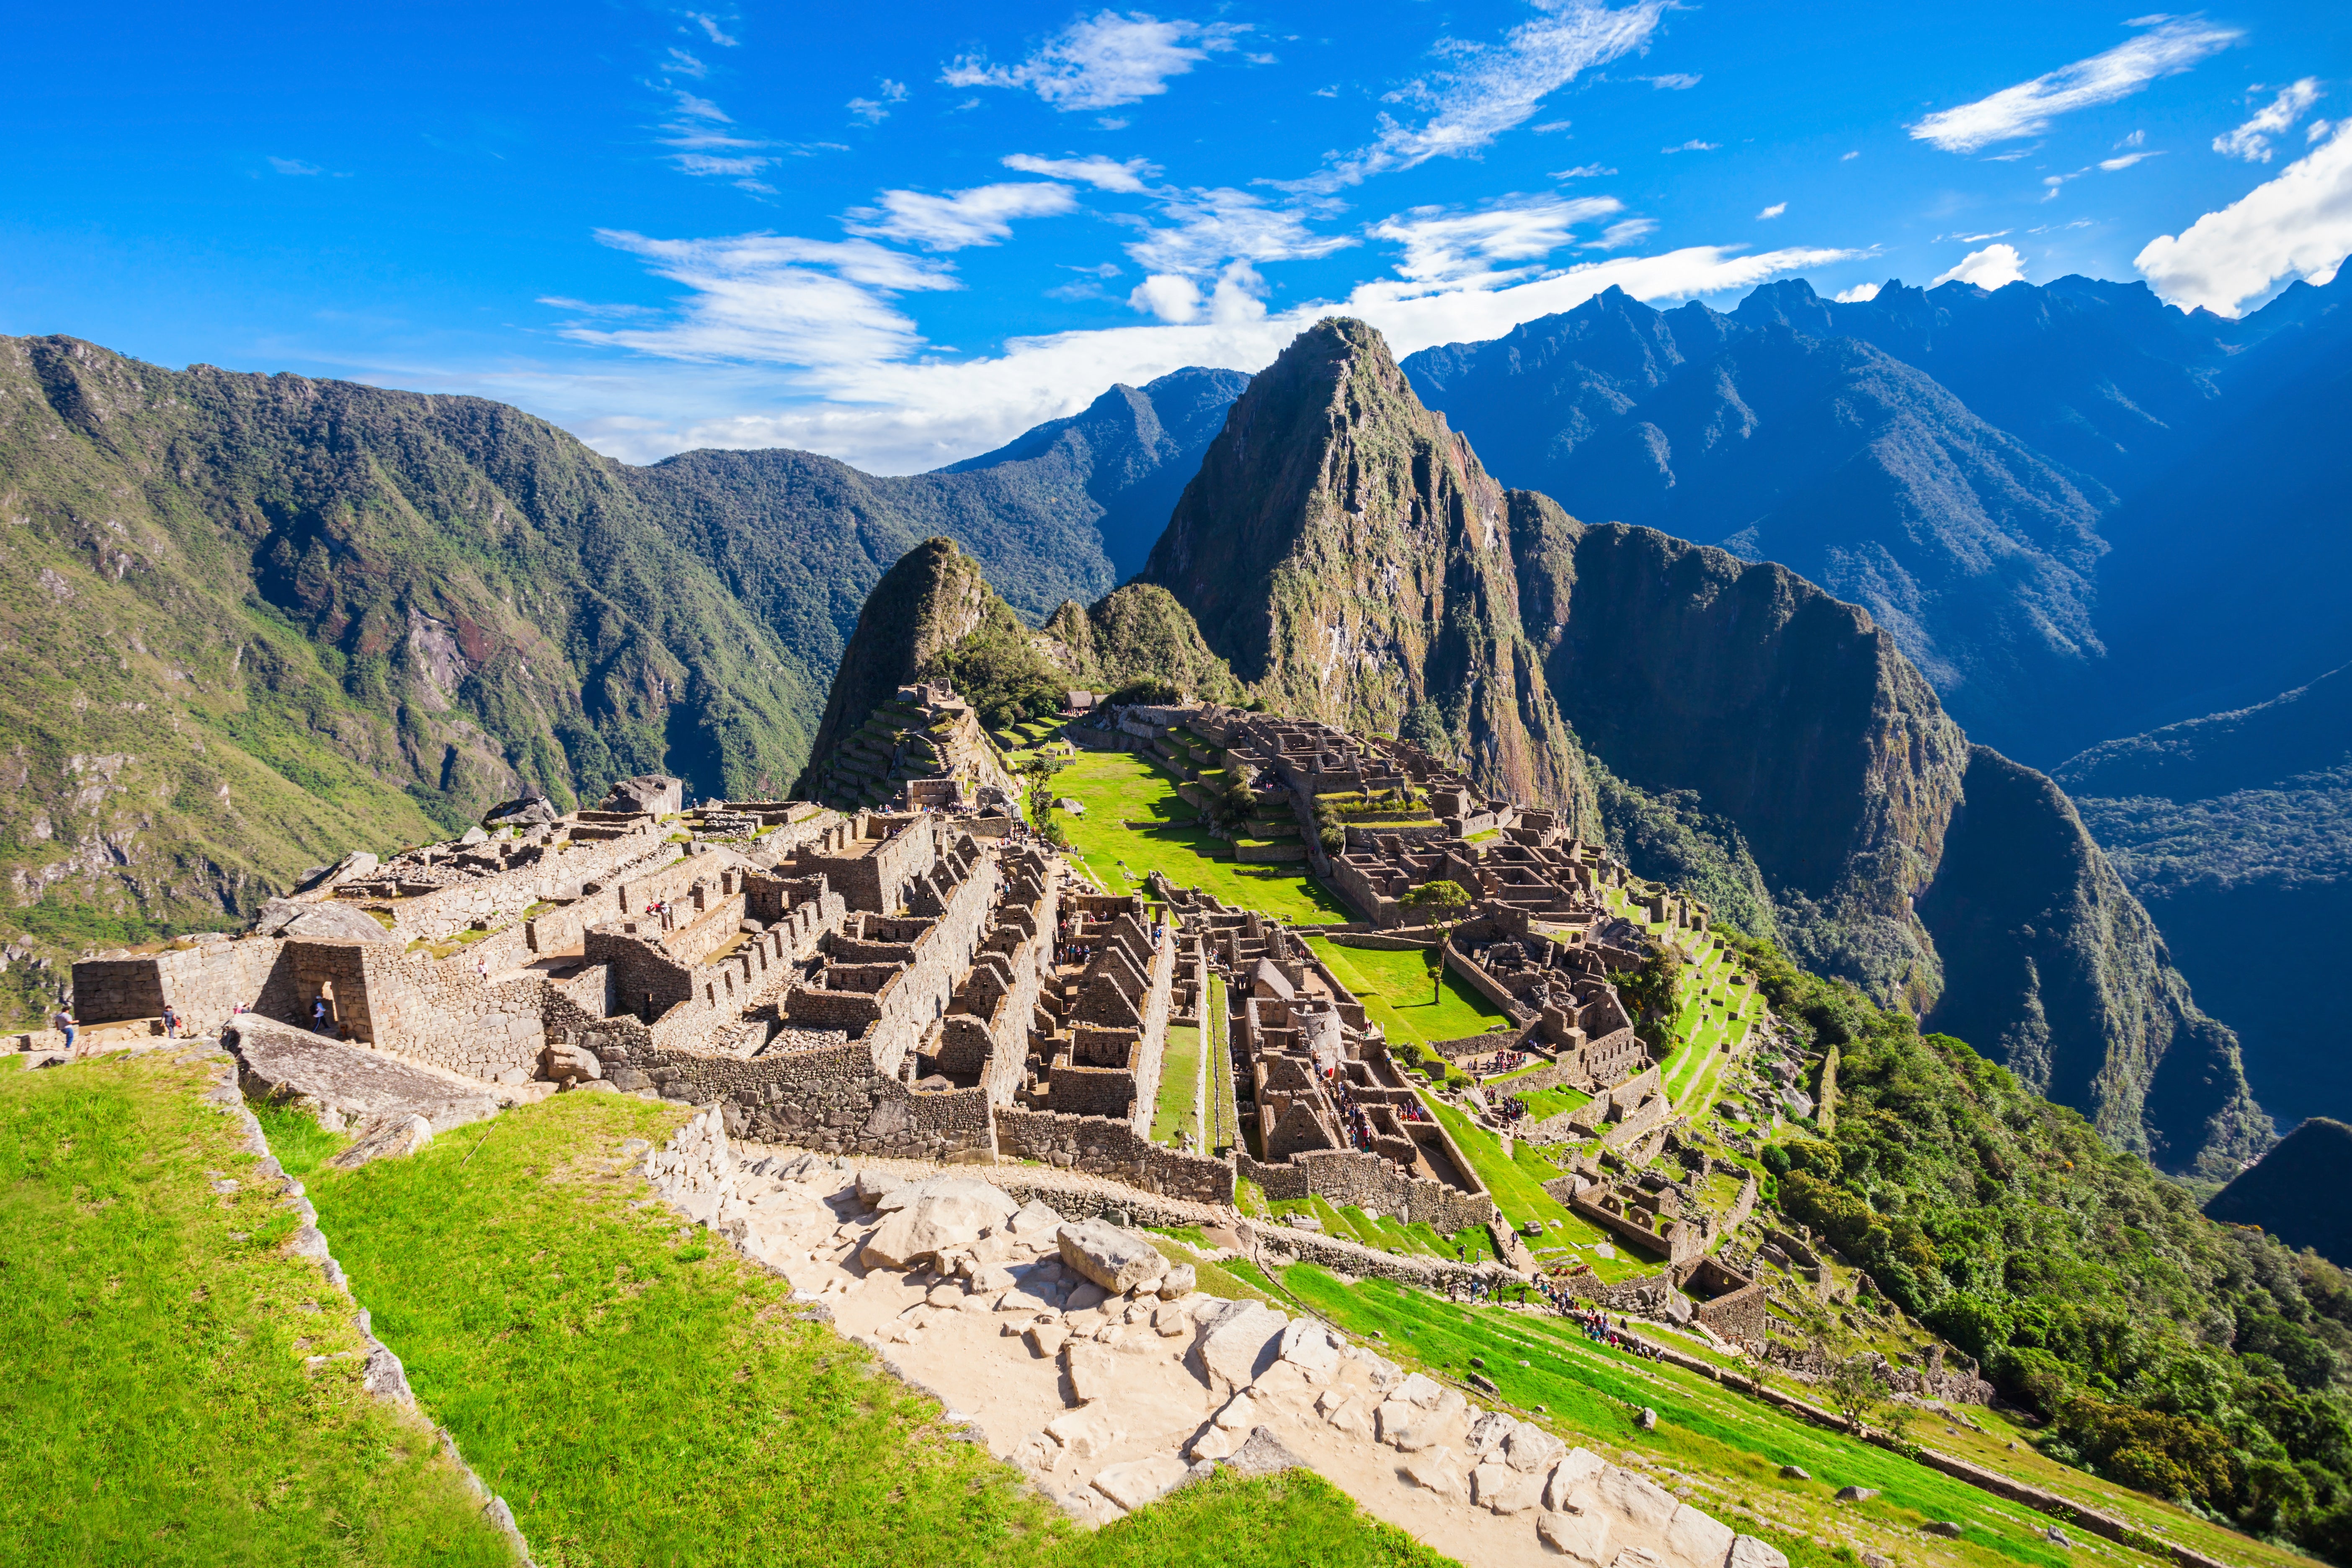 Hundreds of tourists have been left stranded in Machu Picchu following protests in Peru